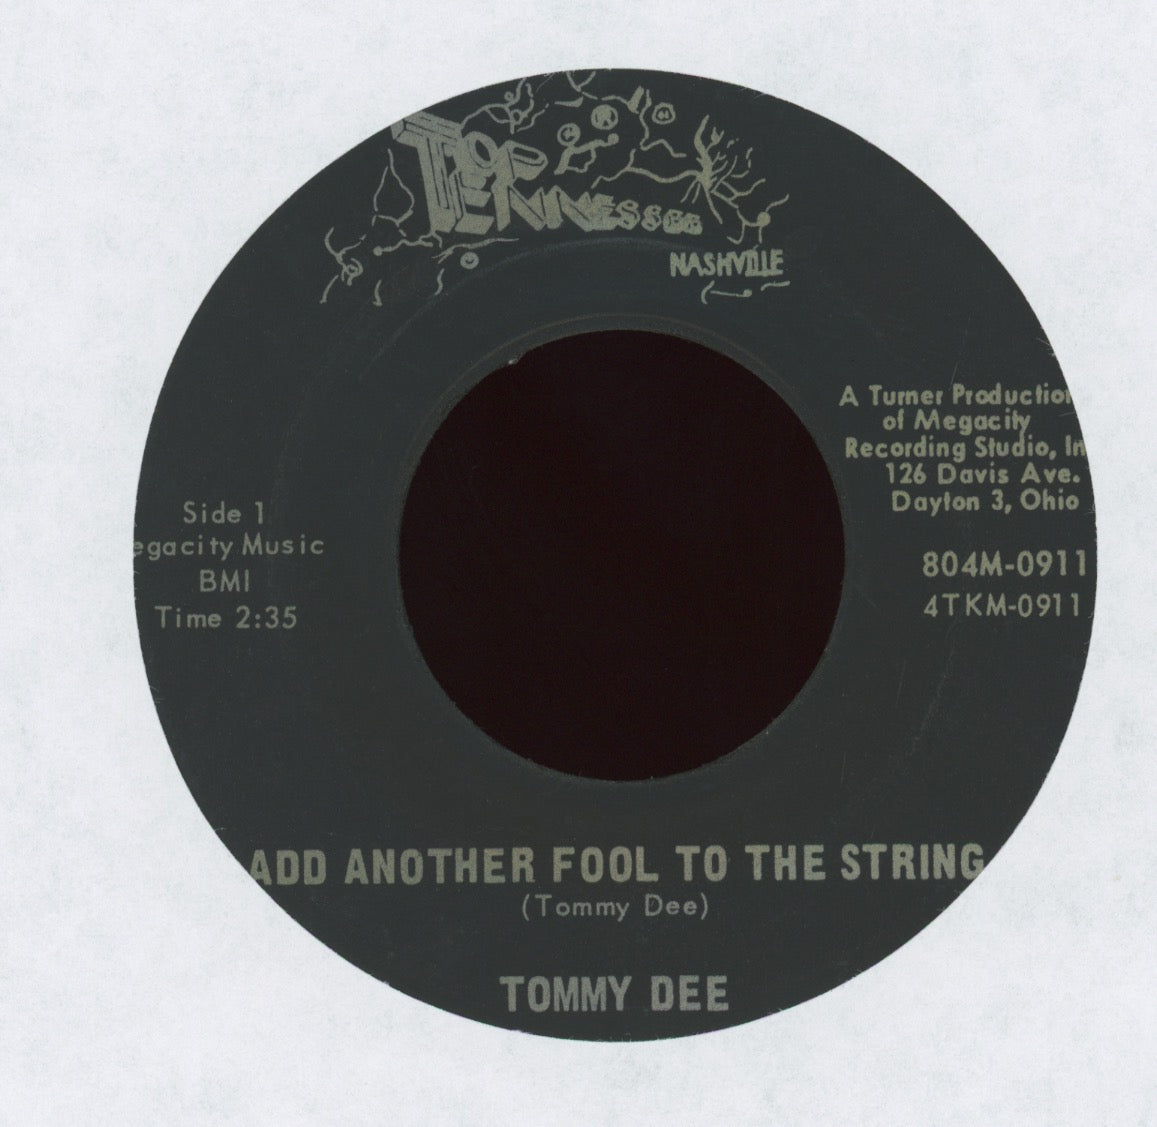 Tommy Dee -Add Another Fool to the String on Top Tennessee Nashville